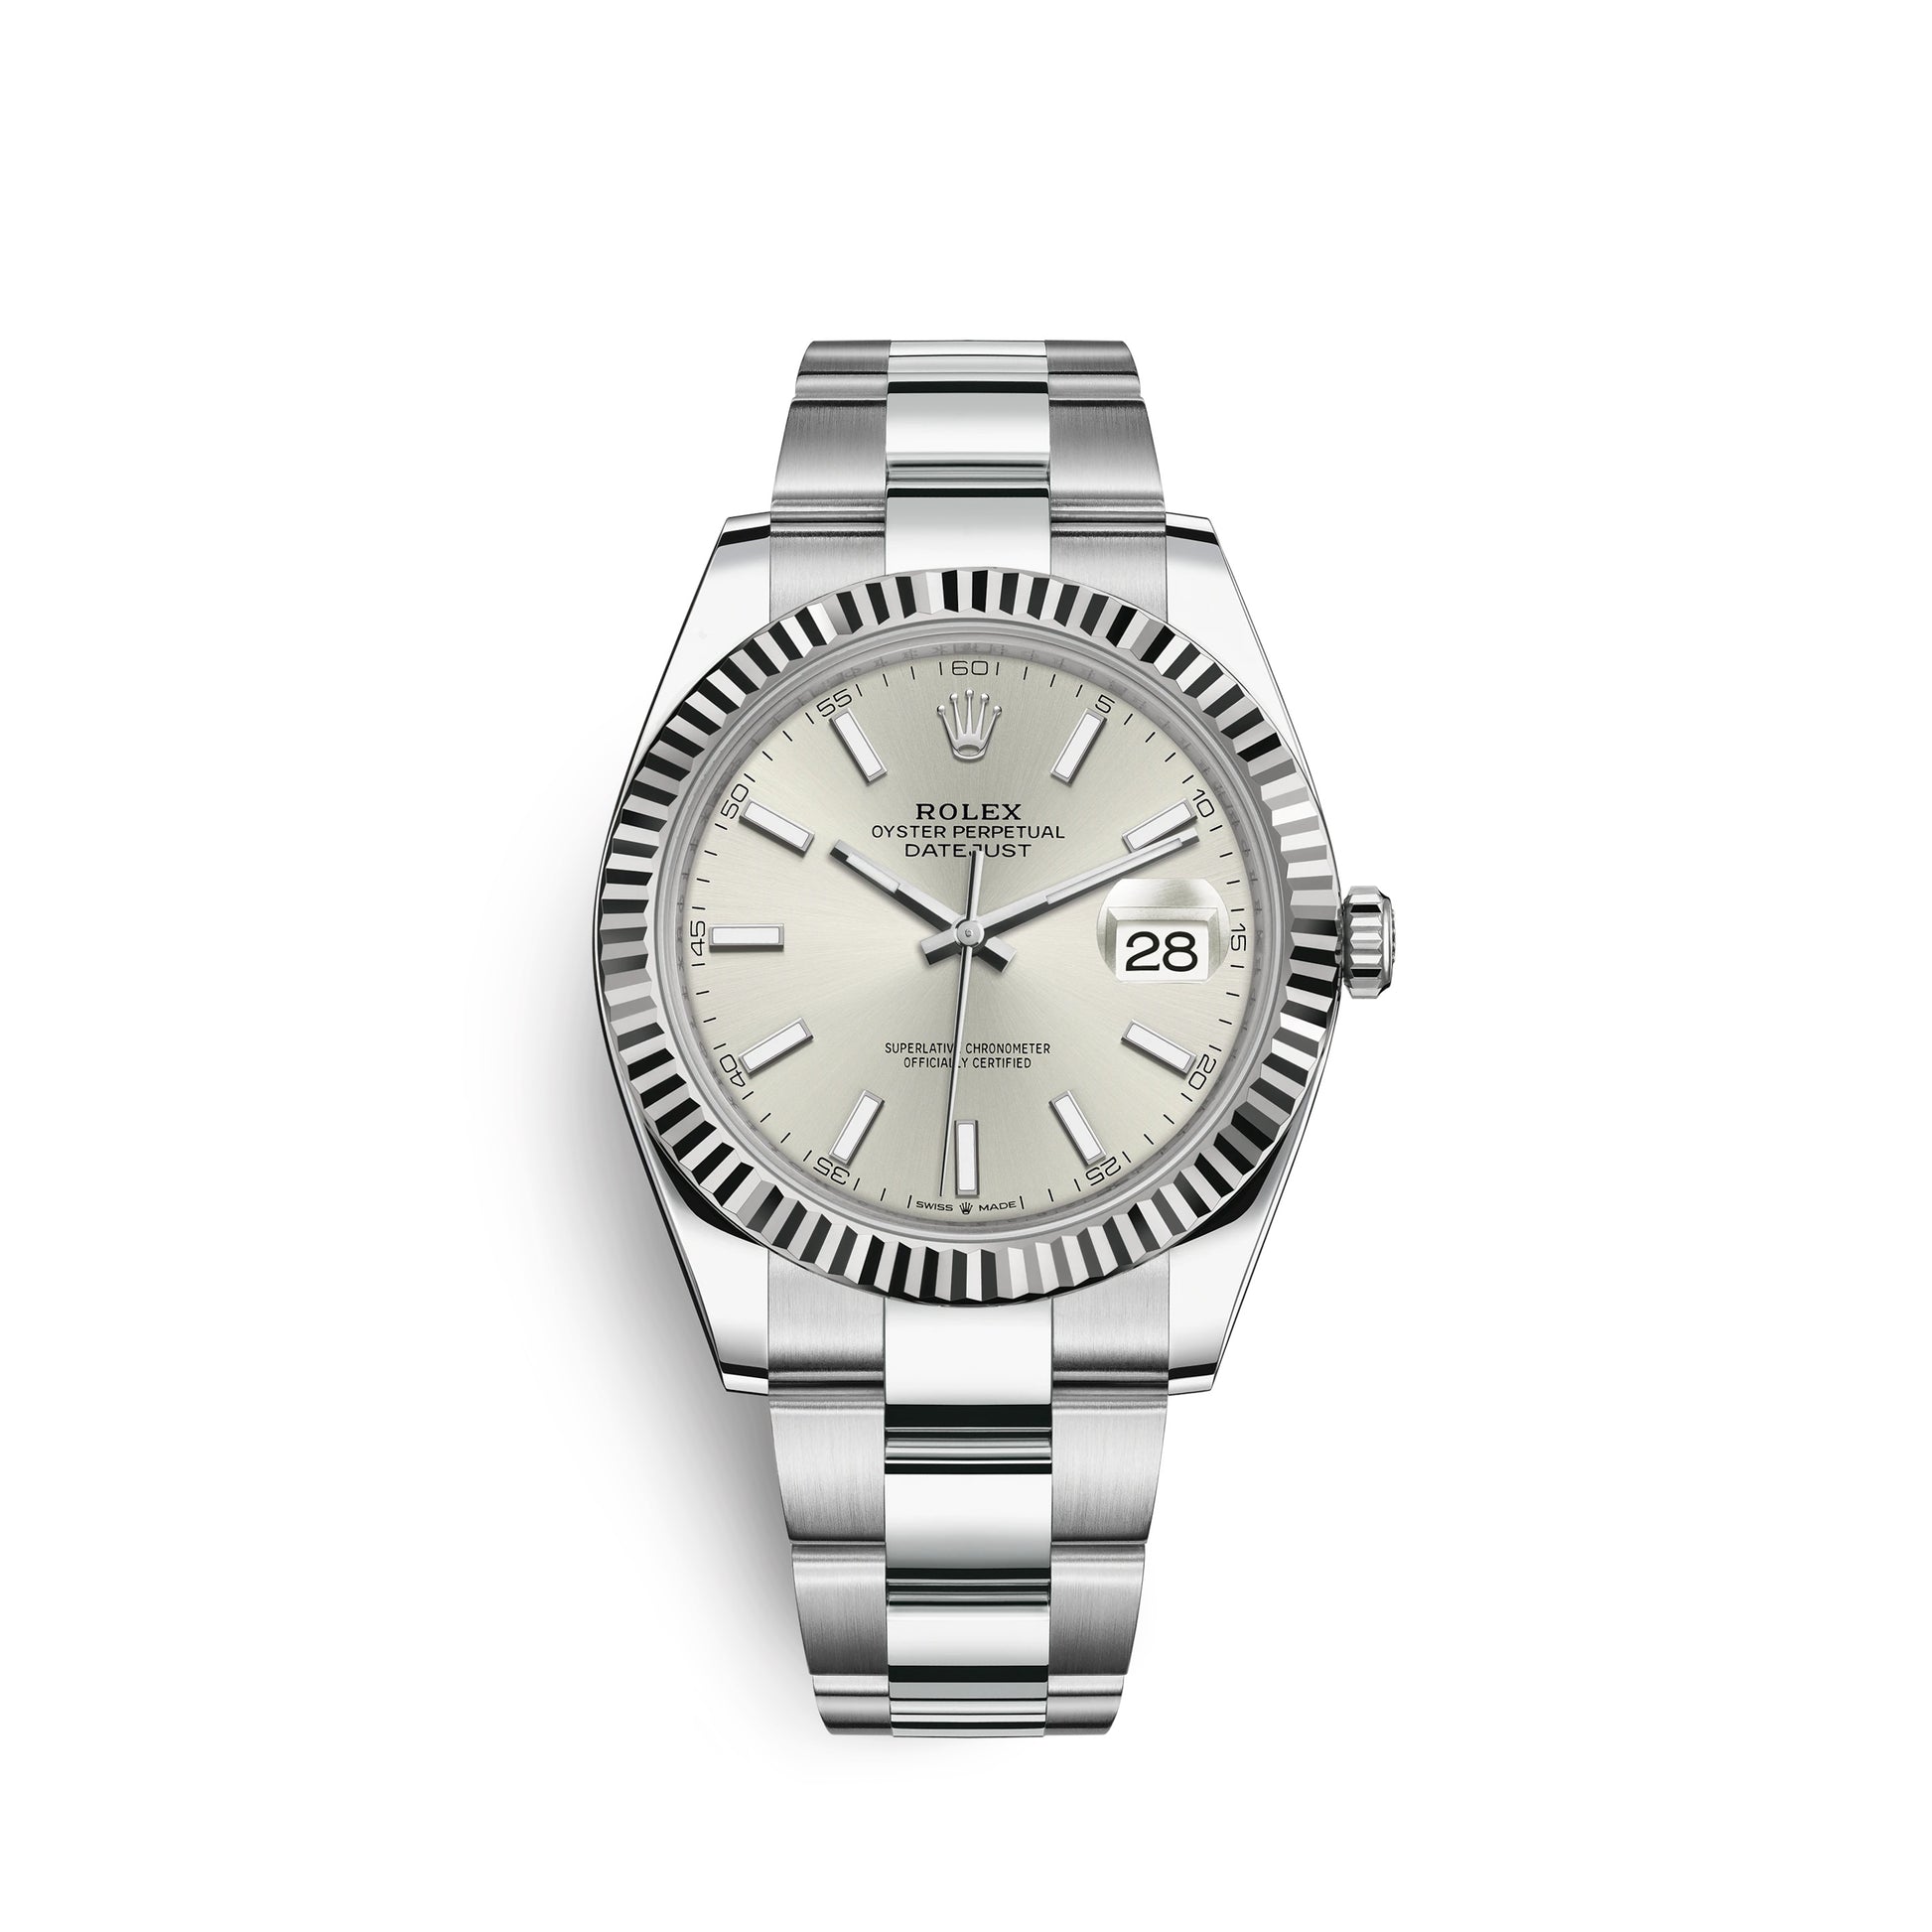 Indflydelse kultur Seneste nyt Rolex Datejust 41, Stainless Steel and 18k White Gold, 41mm, Ref# 1263 –  Affordable Swiss Watches Inc.